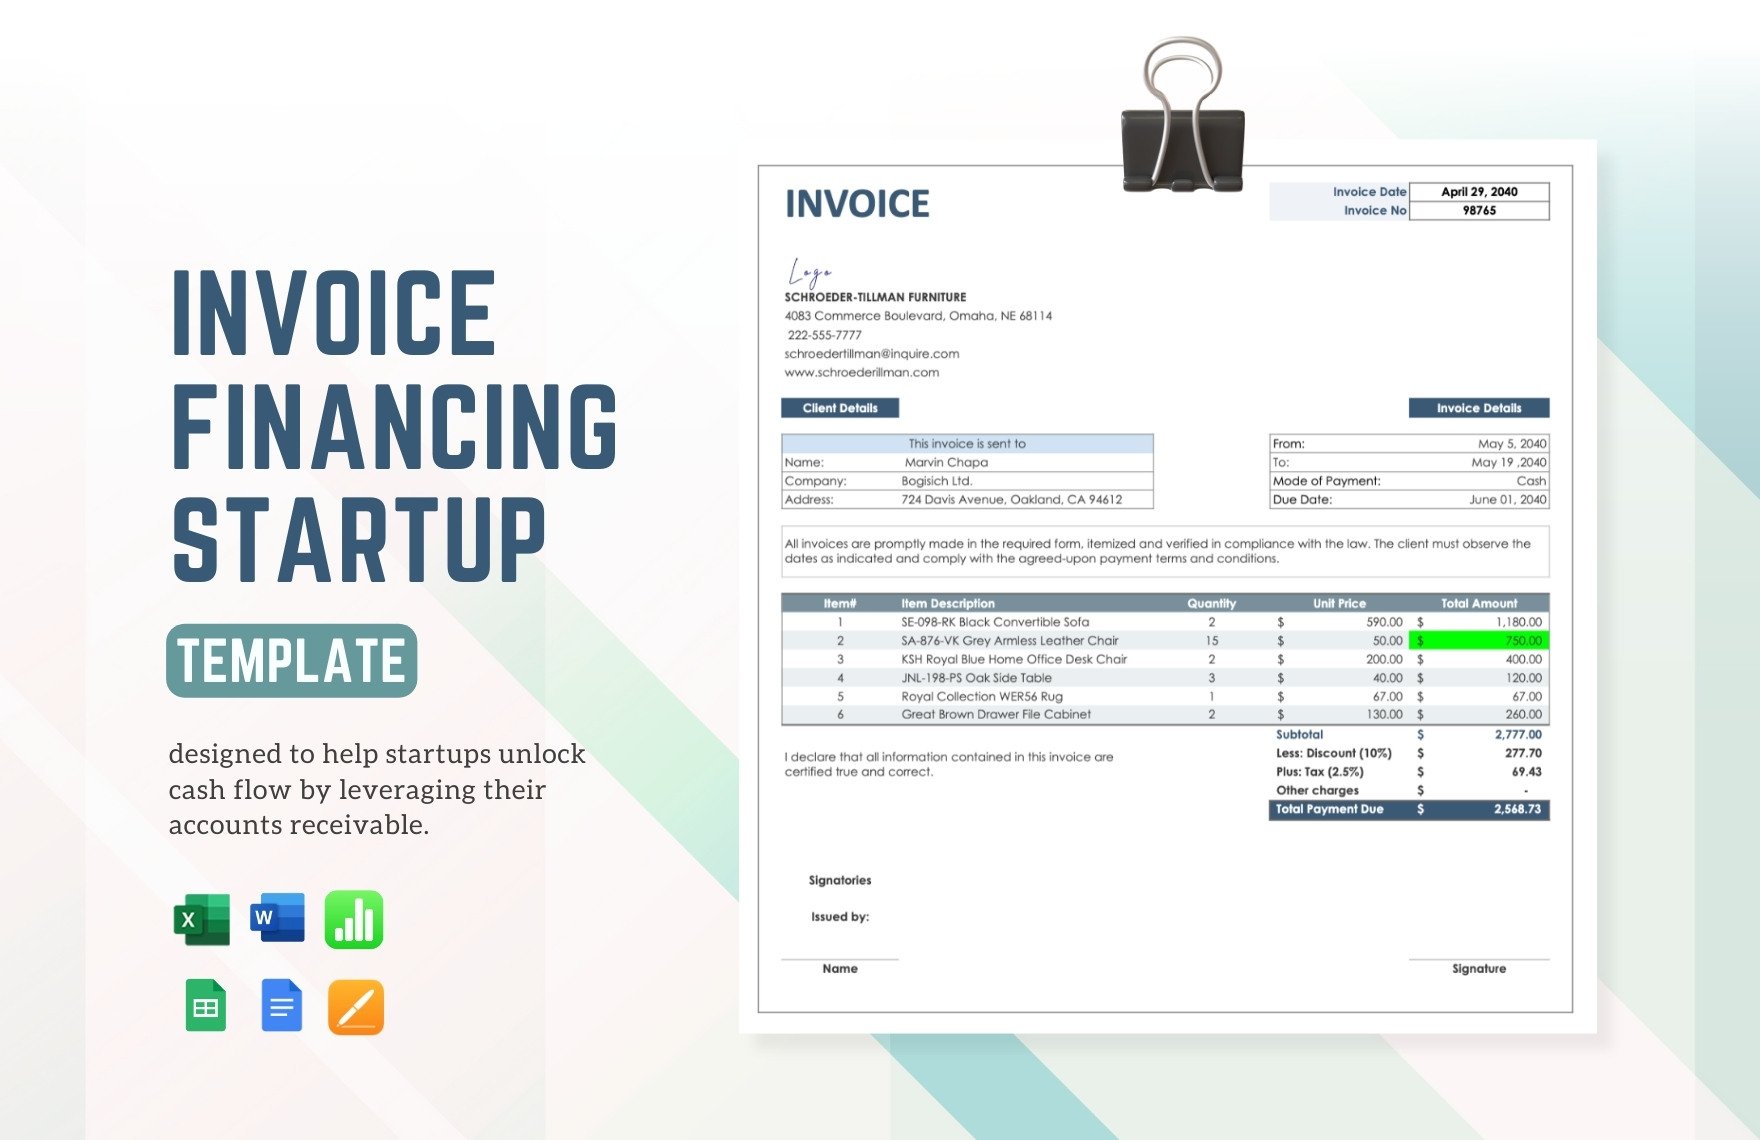 Invoice Financing Startup Template in Word, Google Docs, Excel, Google Sheets, PSD, Apple Pages